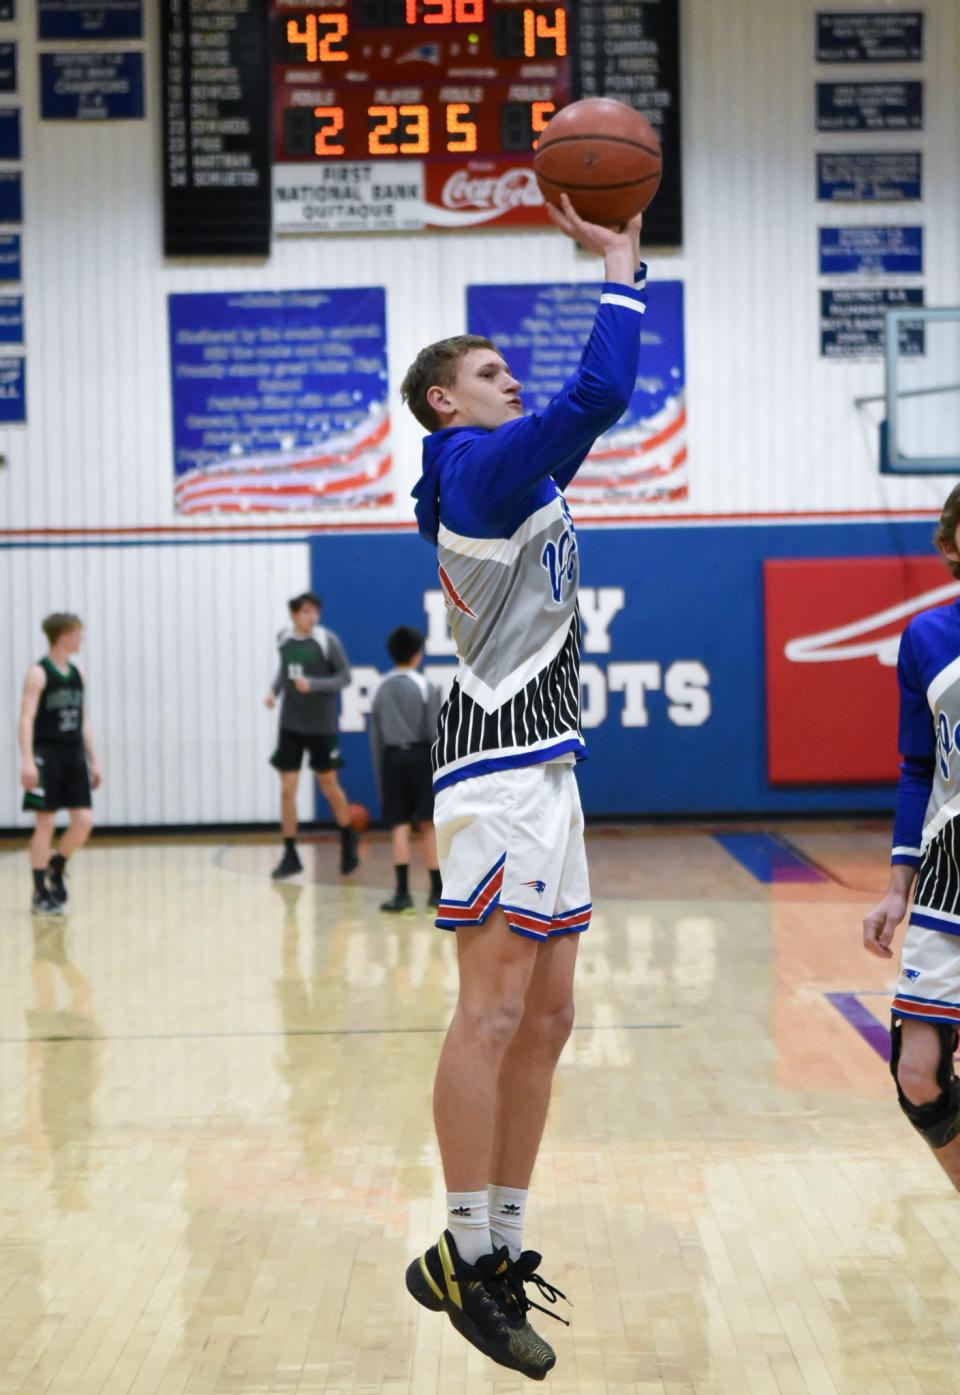 Valley's Parker Hartman (42) shoots a 3-point attempt in warmup before Valley's 46-34 win against Hedley on Friday, Jan. 28 2022 at Valley High School.